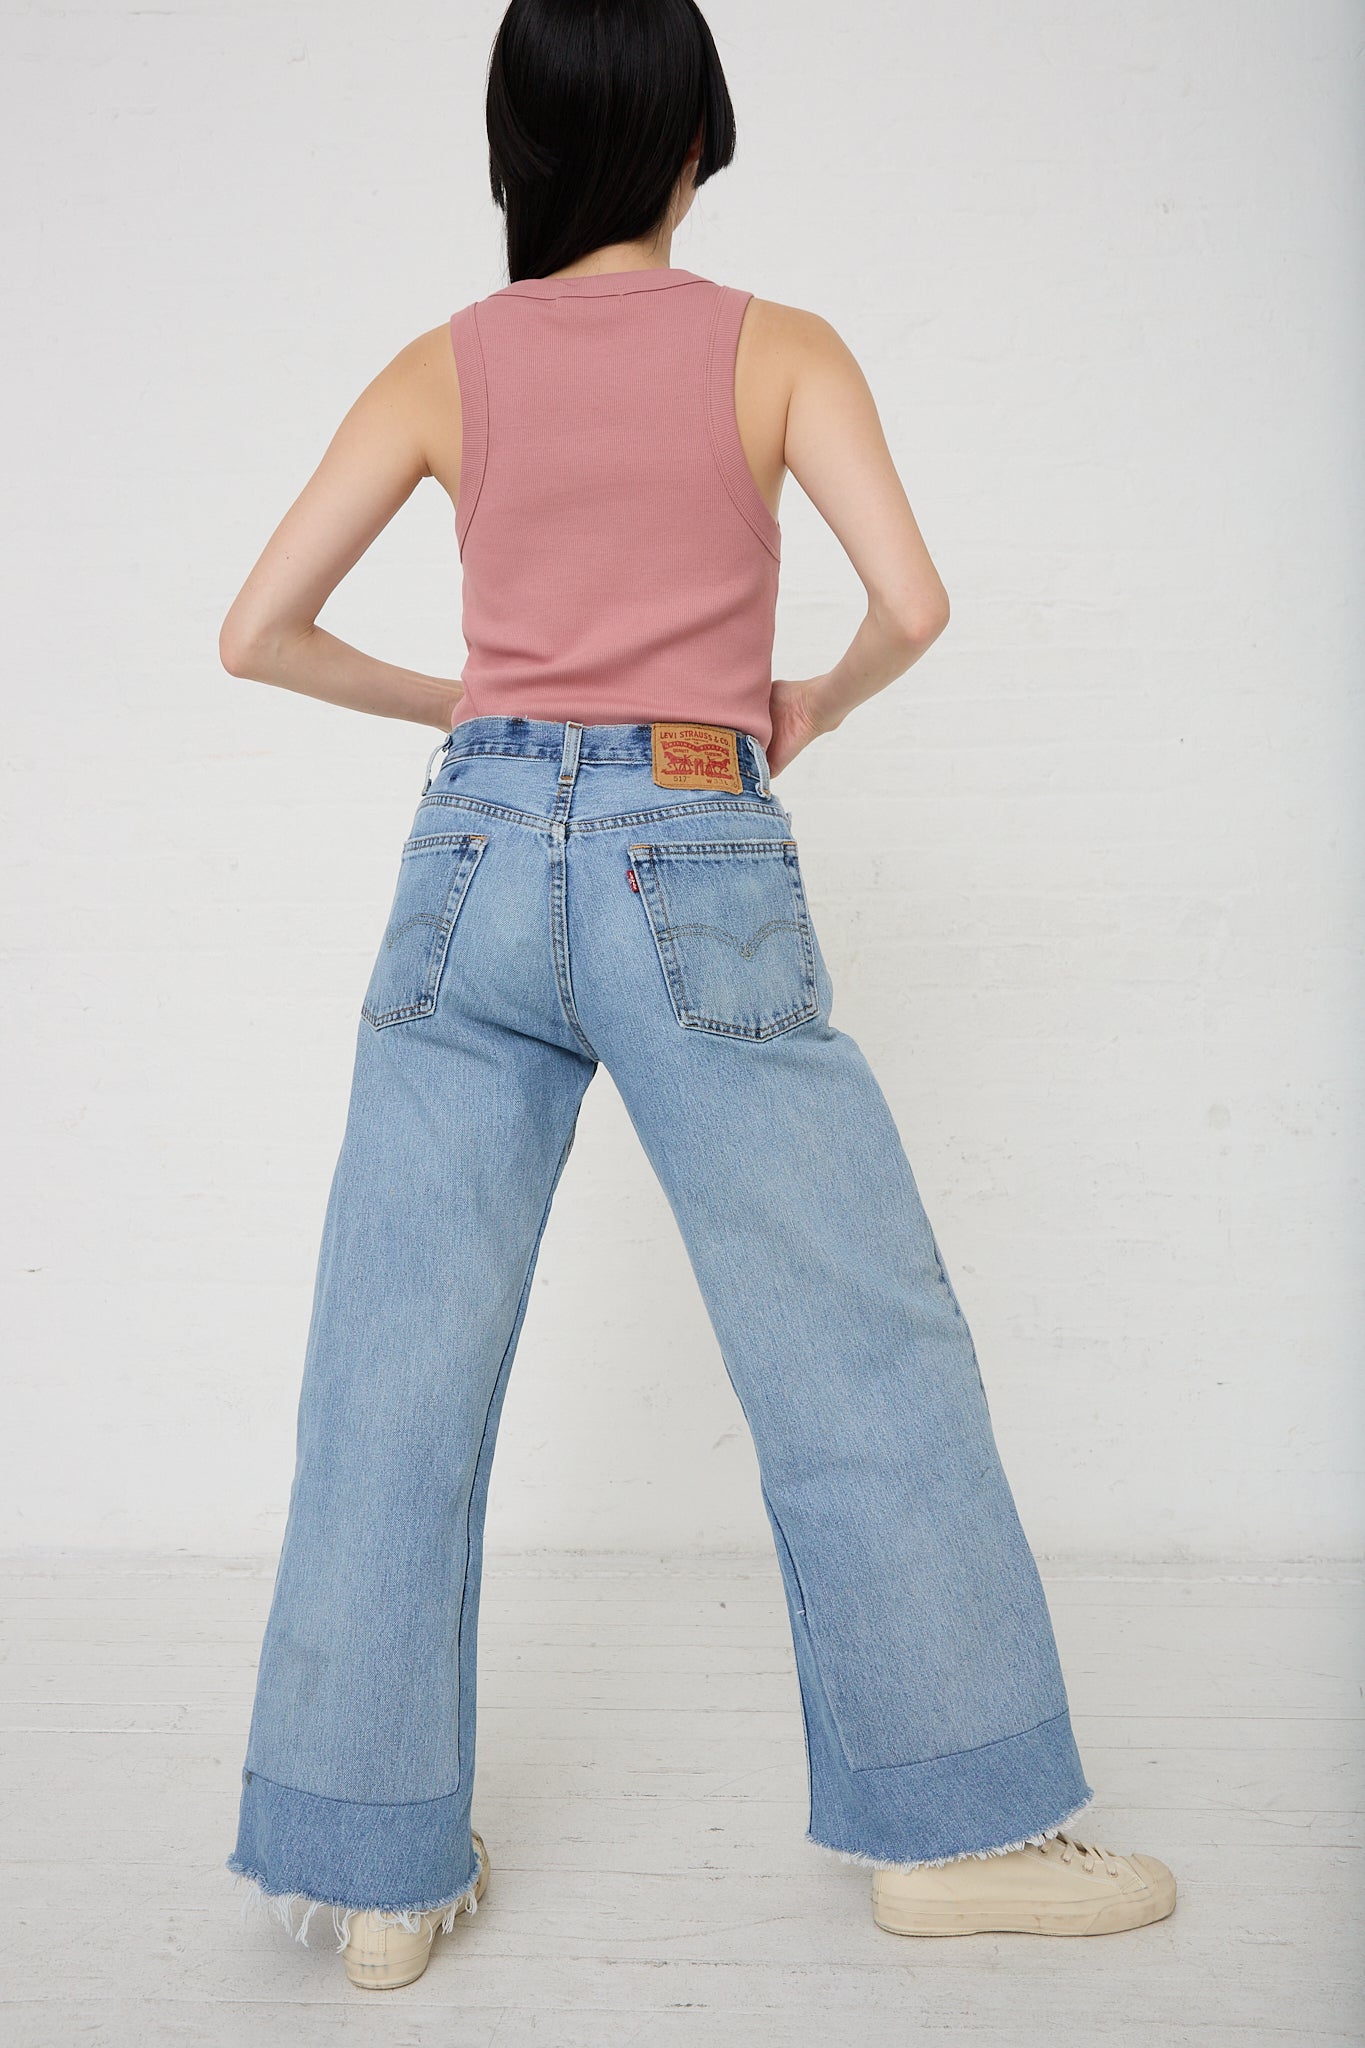 A woman wearing a pink tank top paired with B Sides' Reworked Culotte in Vintage Indigo denim flared jeans. Back view and full length.